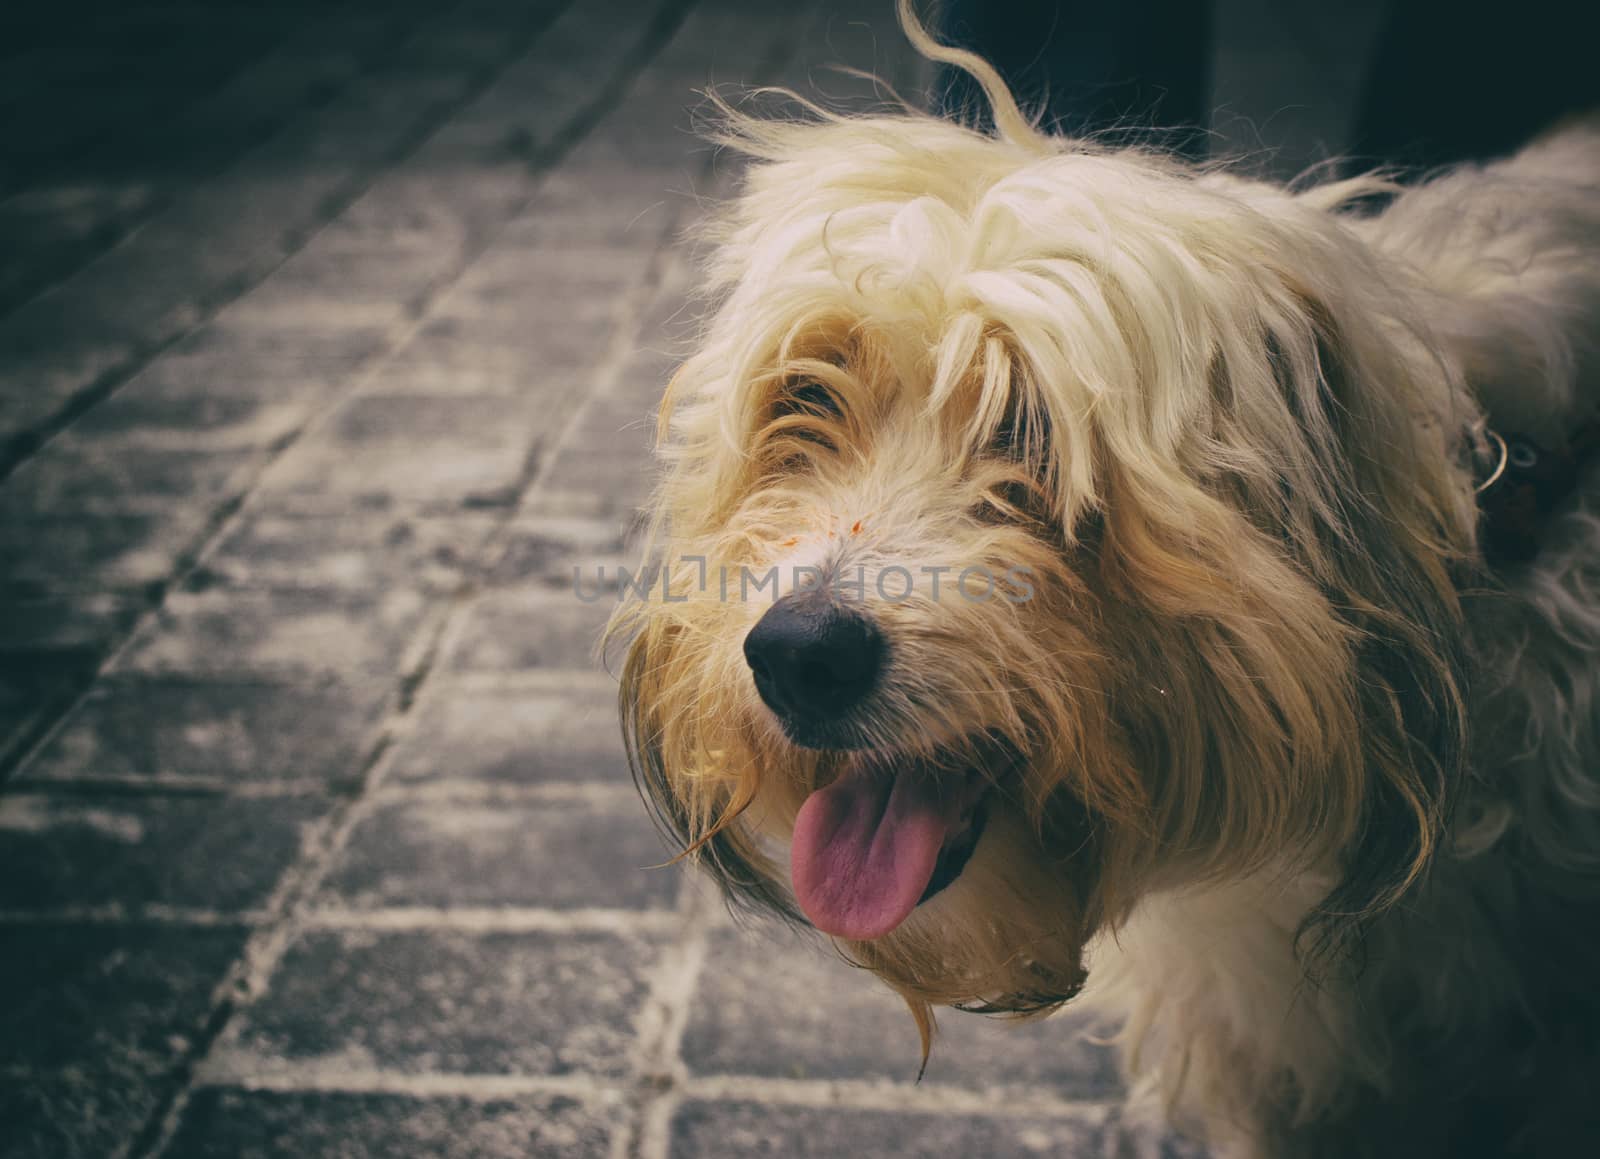 Photograph of a hairy dog on a concrete floor